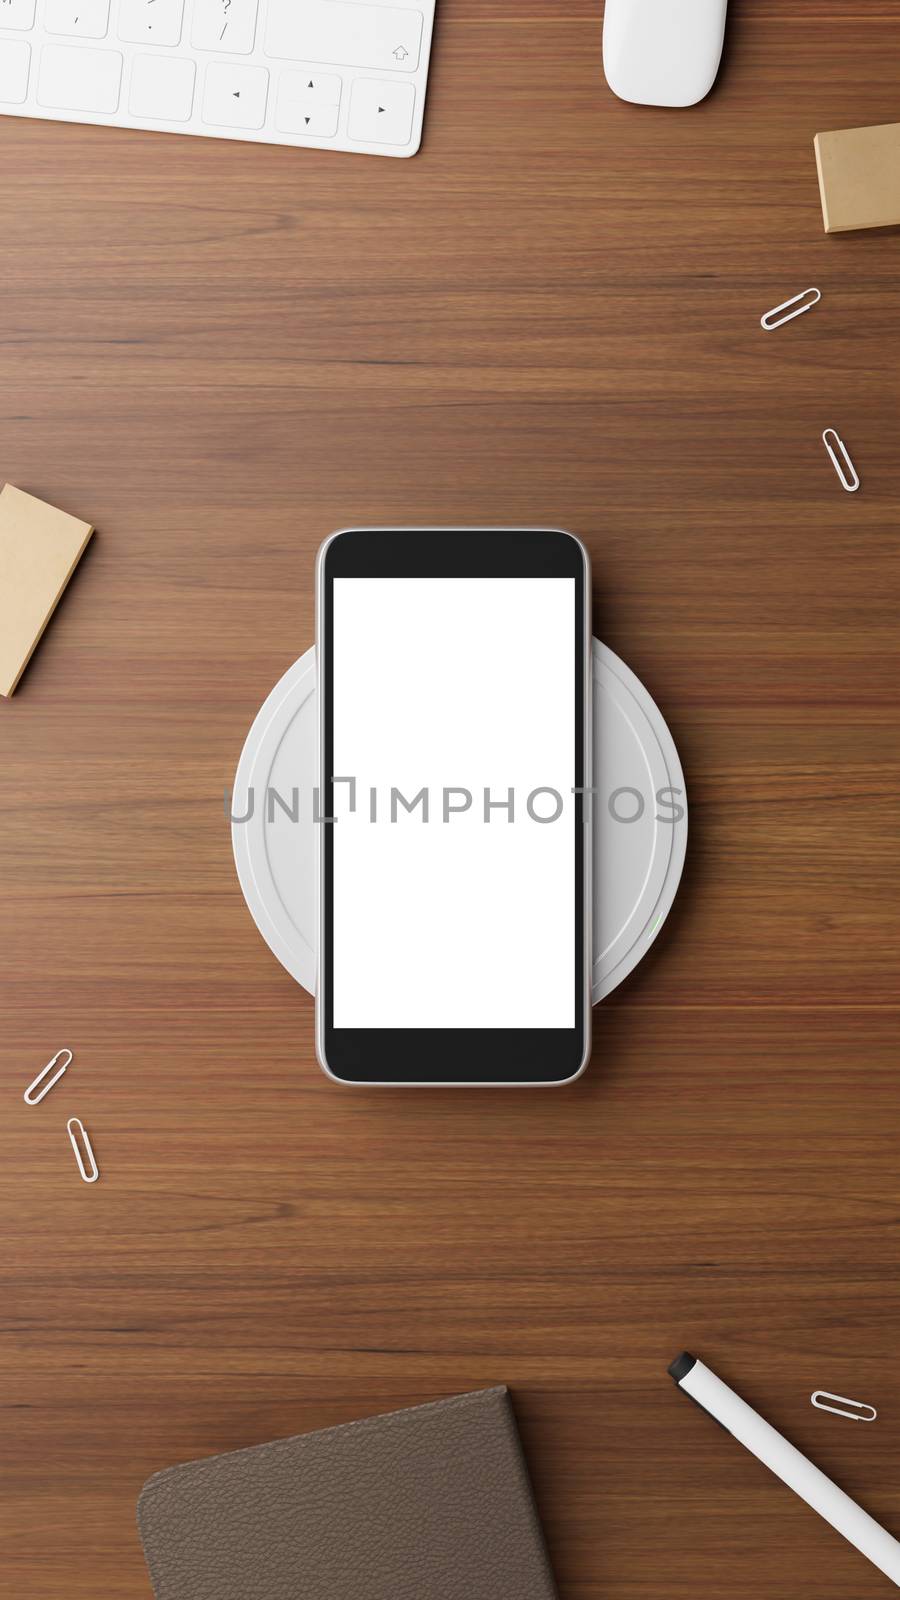 Mobile phone mockup scene. Mobile phone charging battery with wireless charger on working table.